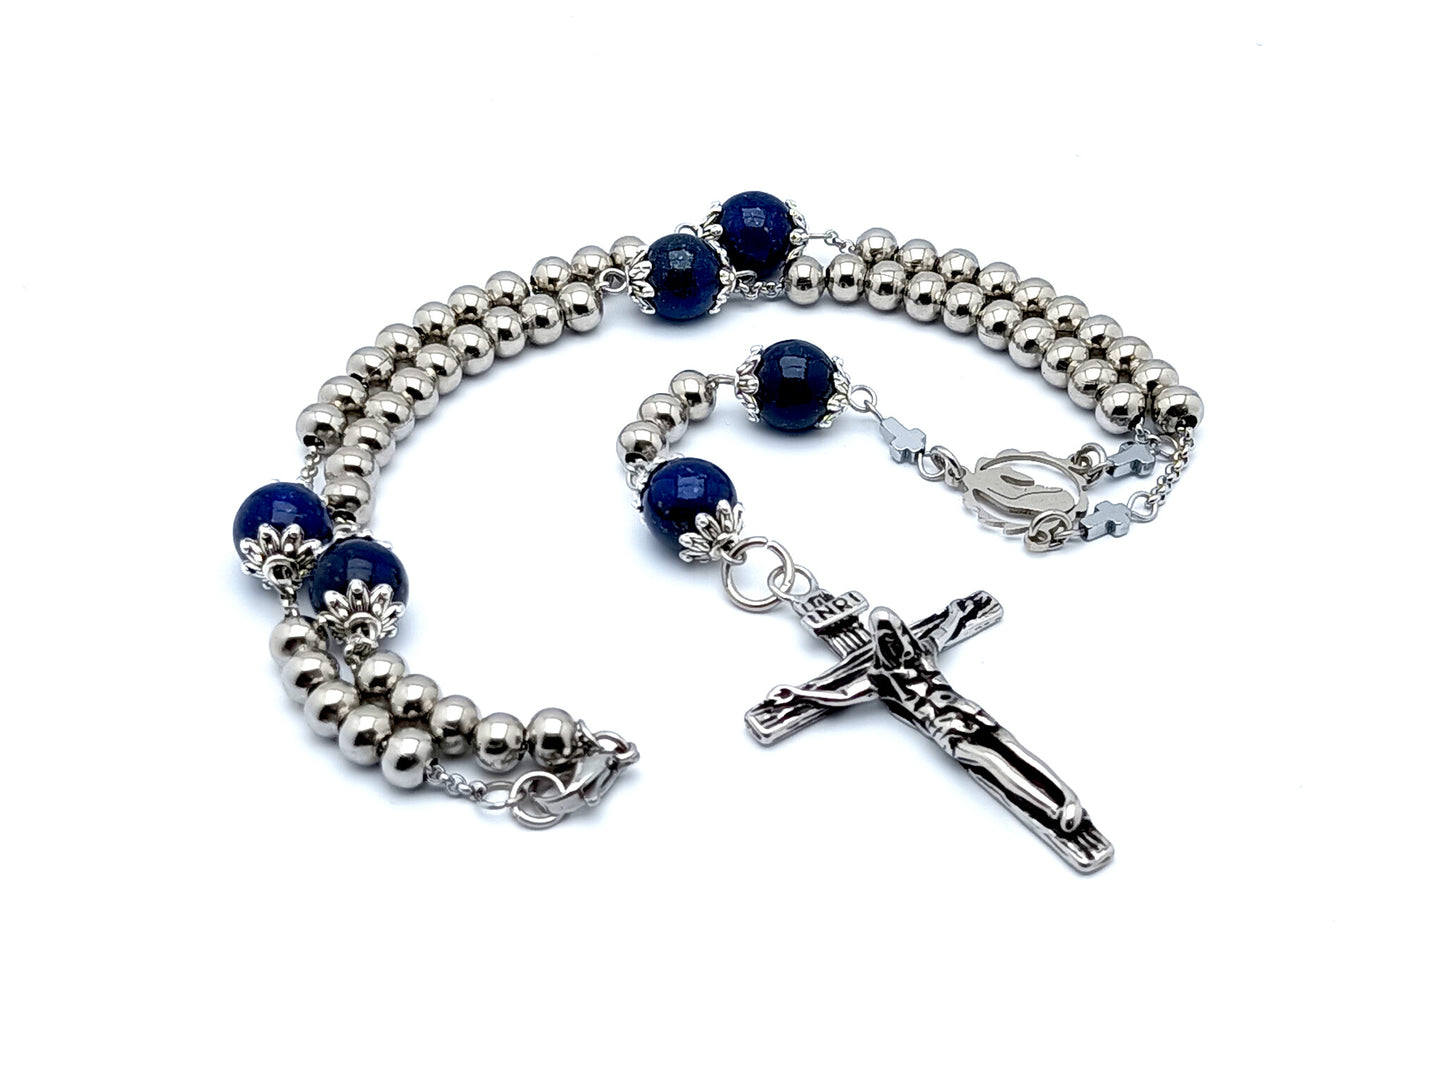 Virgin Mary unique rosary beads with lapis lazuli gemstone and stainless steel beads and stainless steel crucifix and clasp.